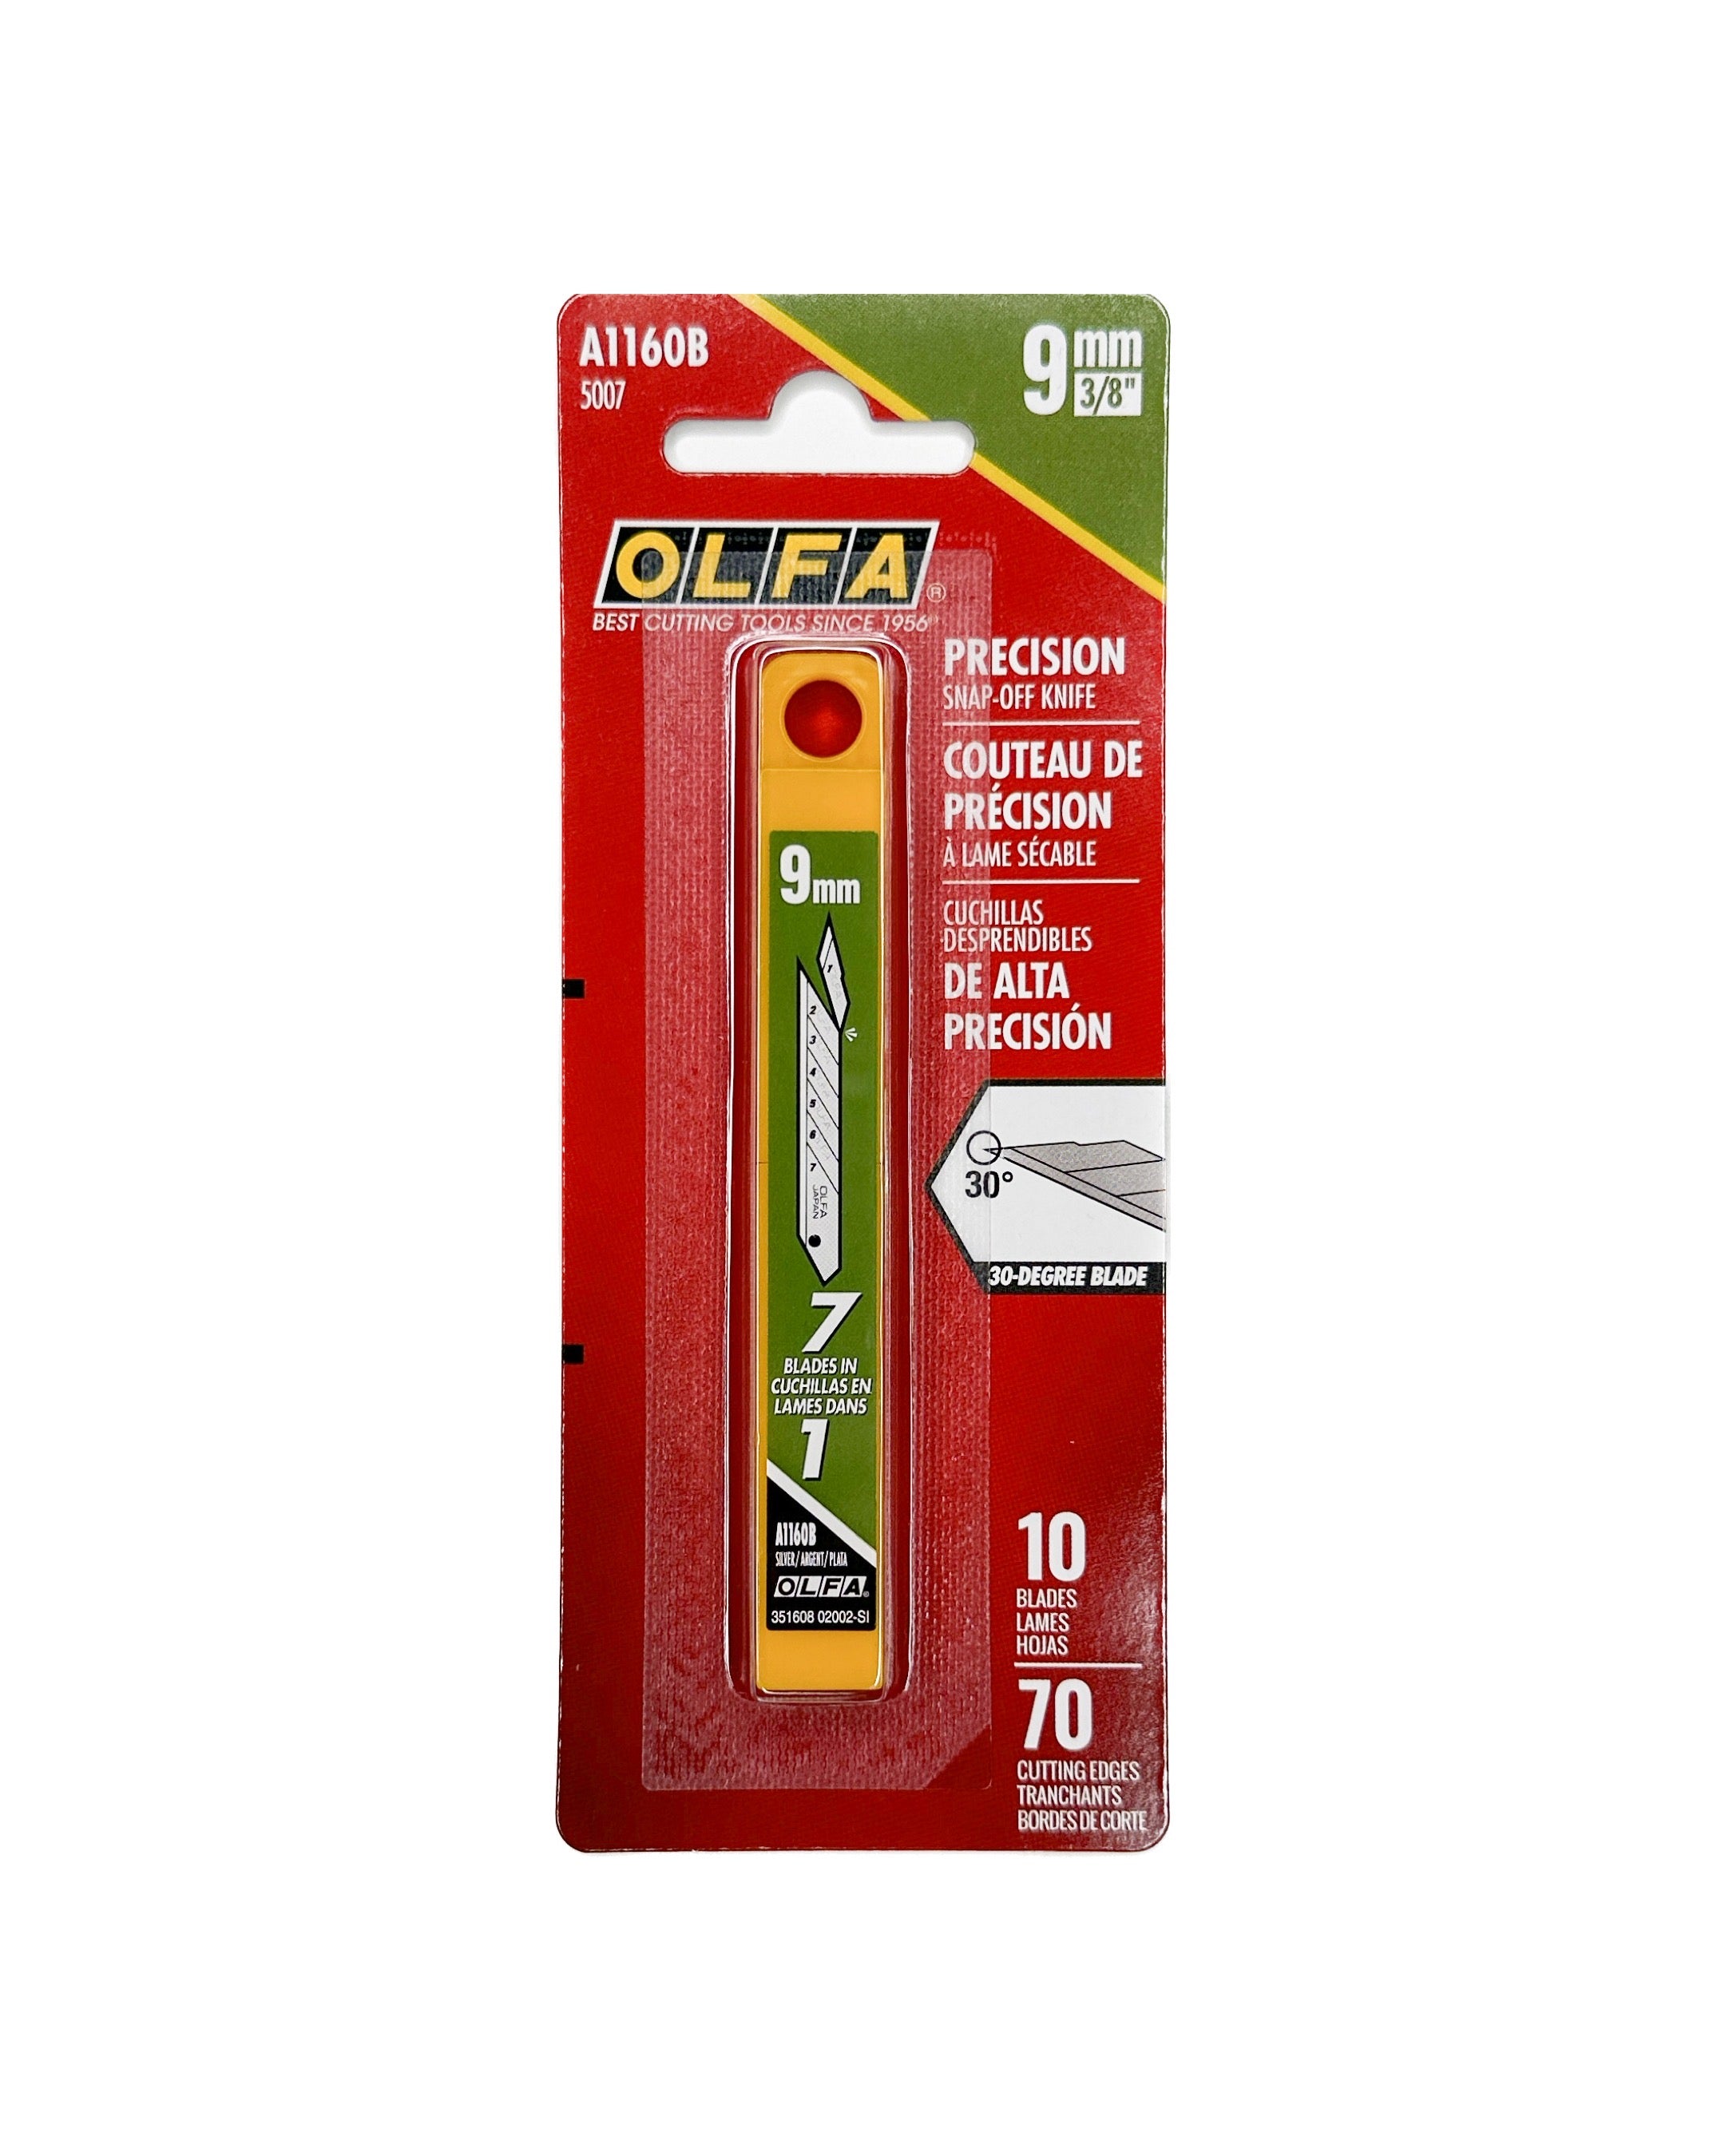 Olfa A1160B 30 Degree Carbon Steel Snap Off Blade (10 pack)